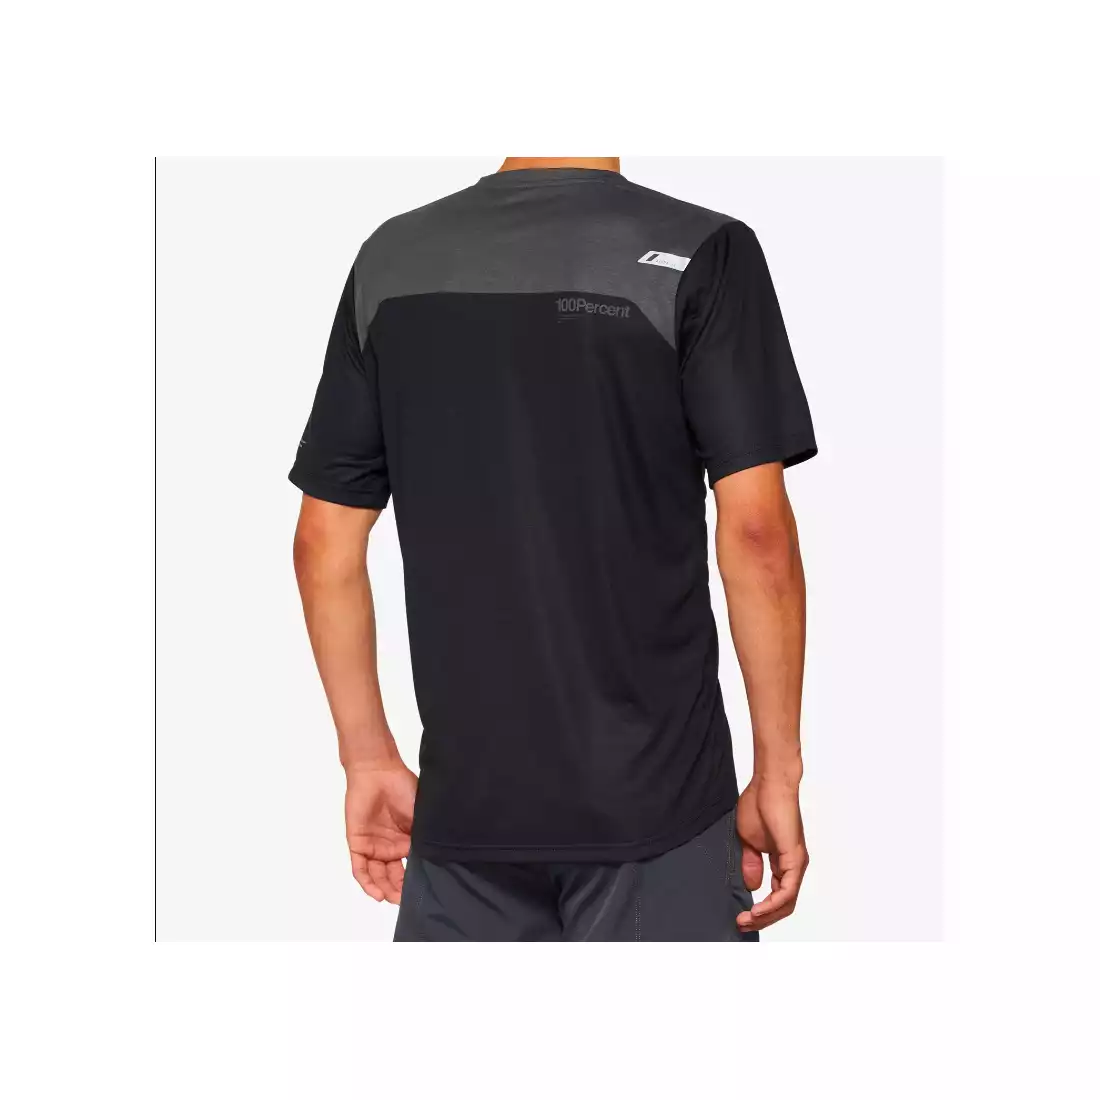 100% AIRMATIC men's cycling jersey black